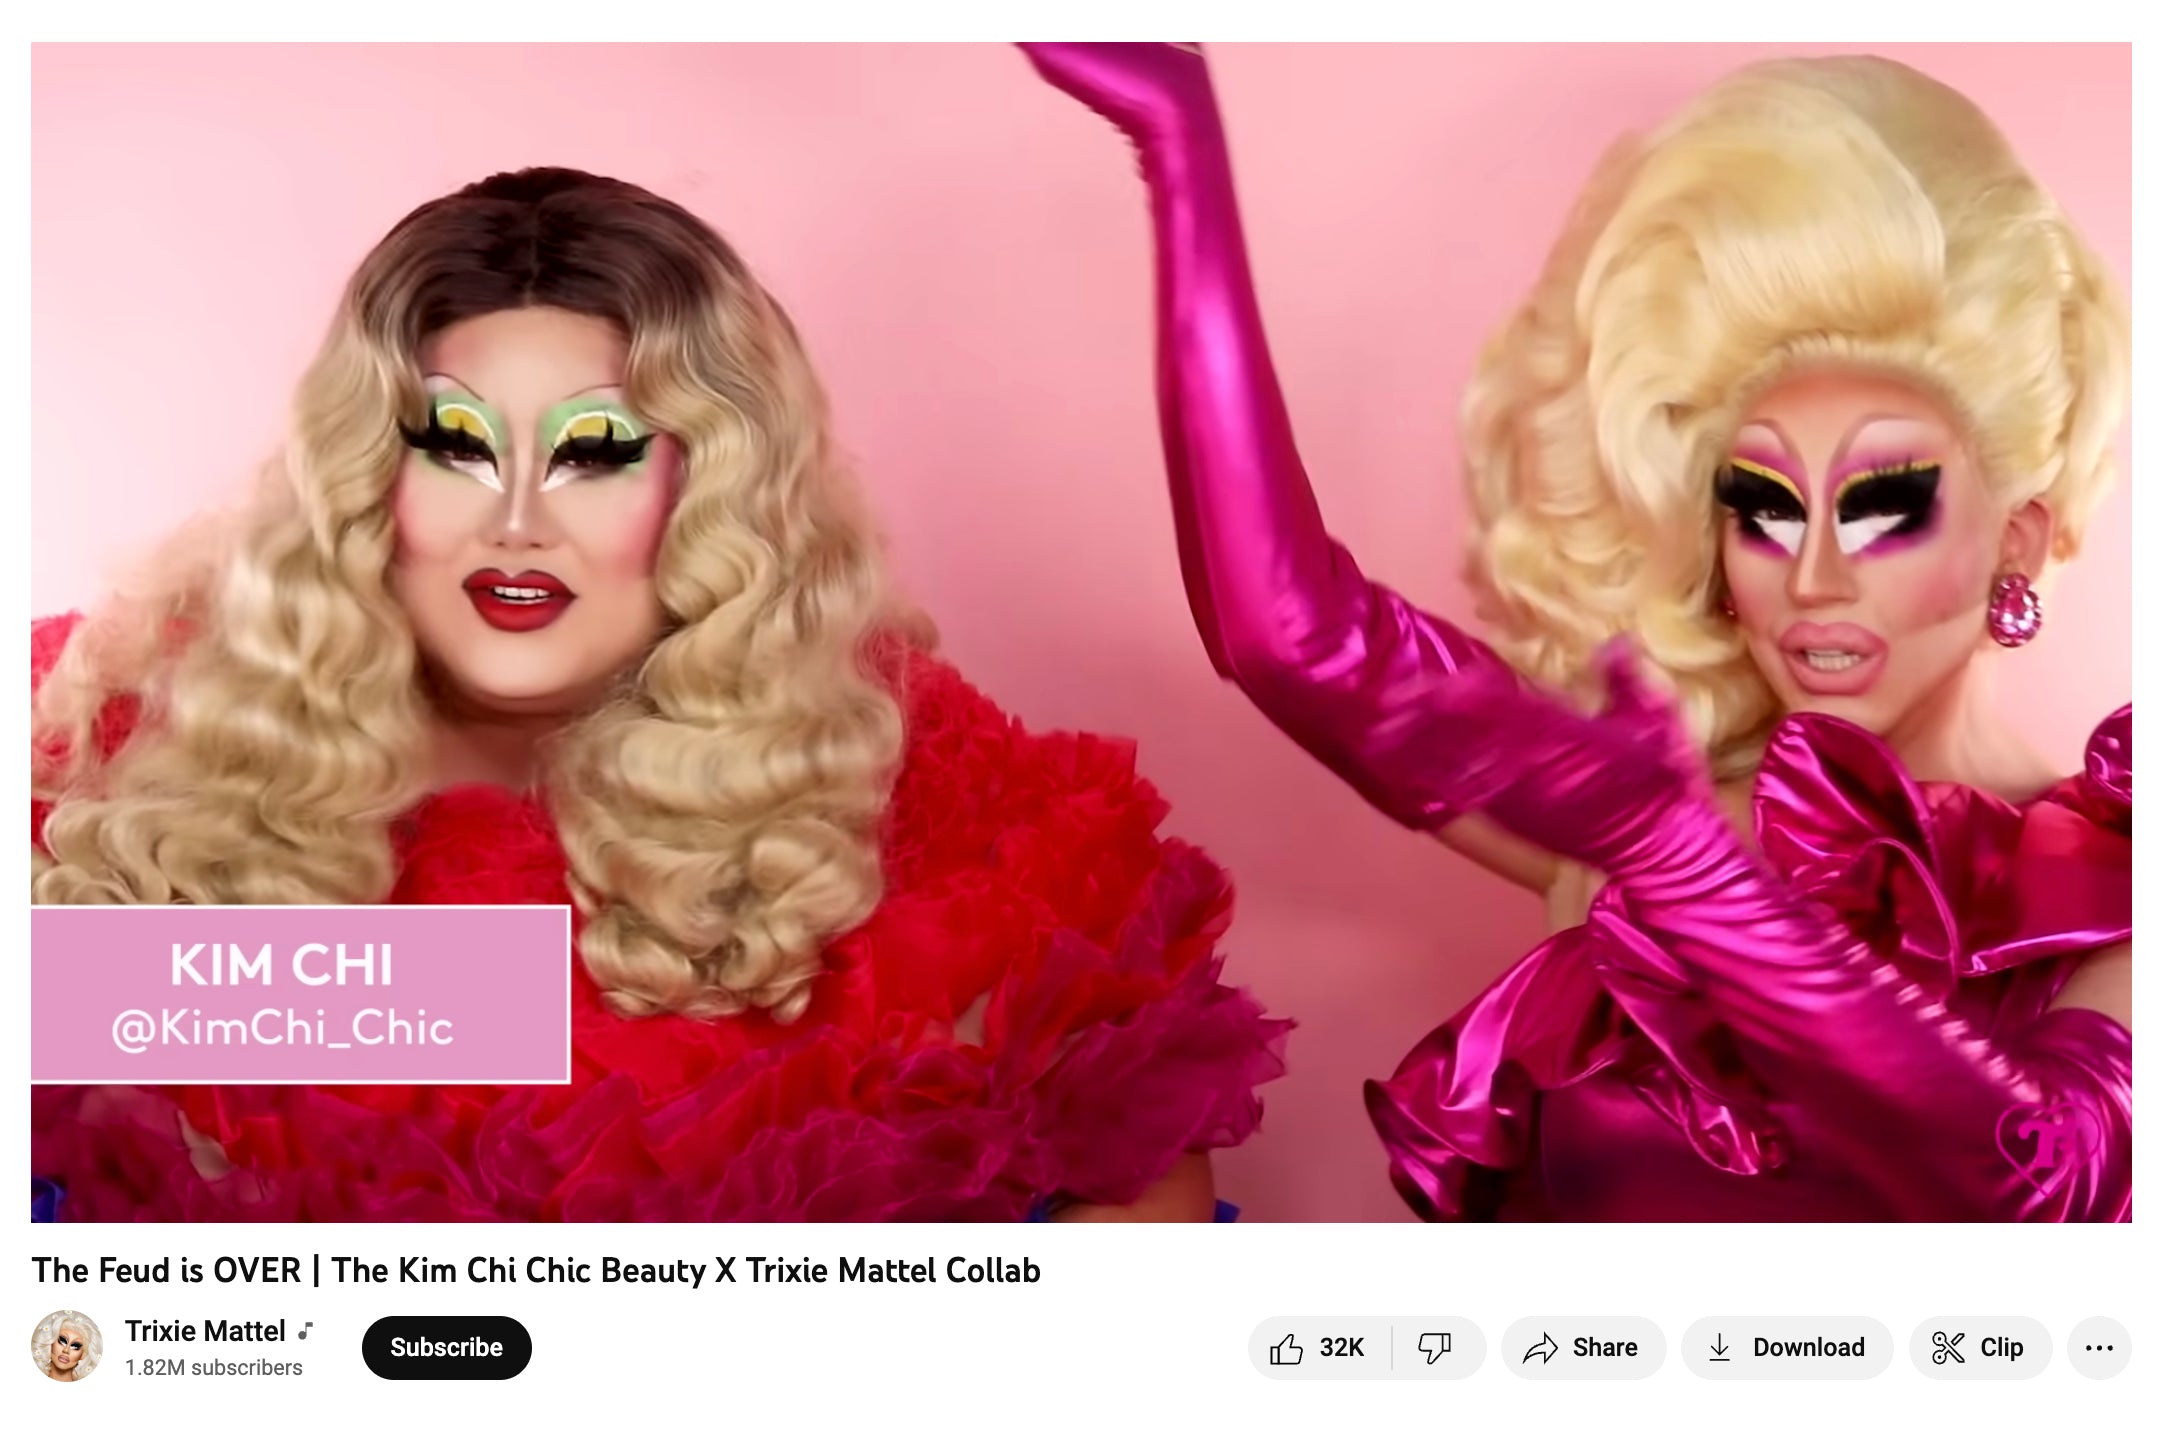 A YouTube video with Trixie Mattel